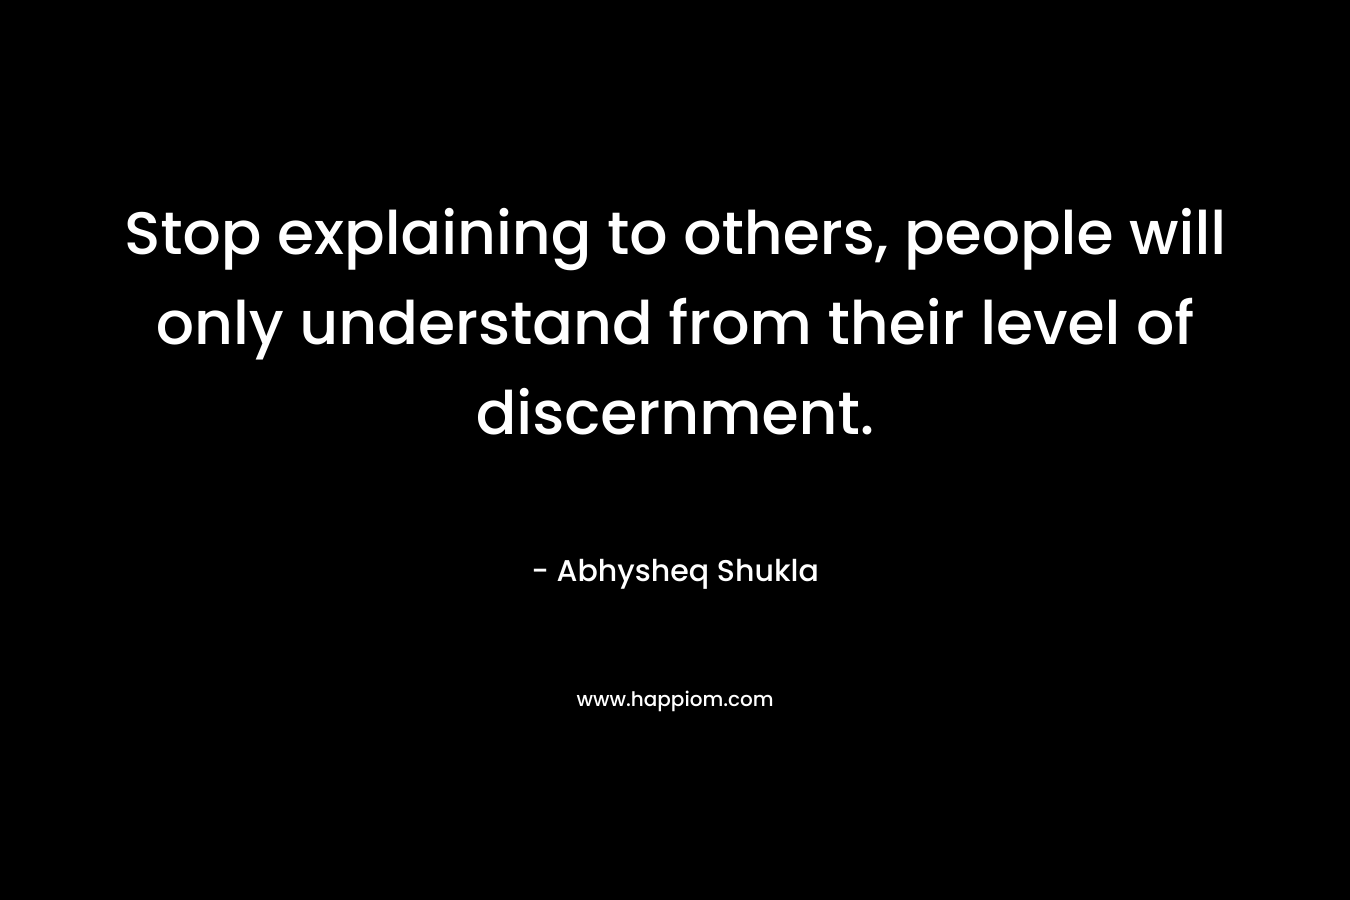 Stop explaining to others, people will only understand from their level of discernment. – Abhysheq Shukla